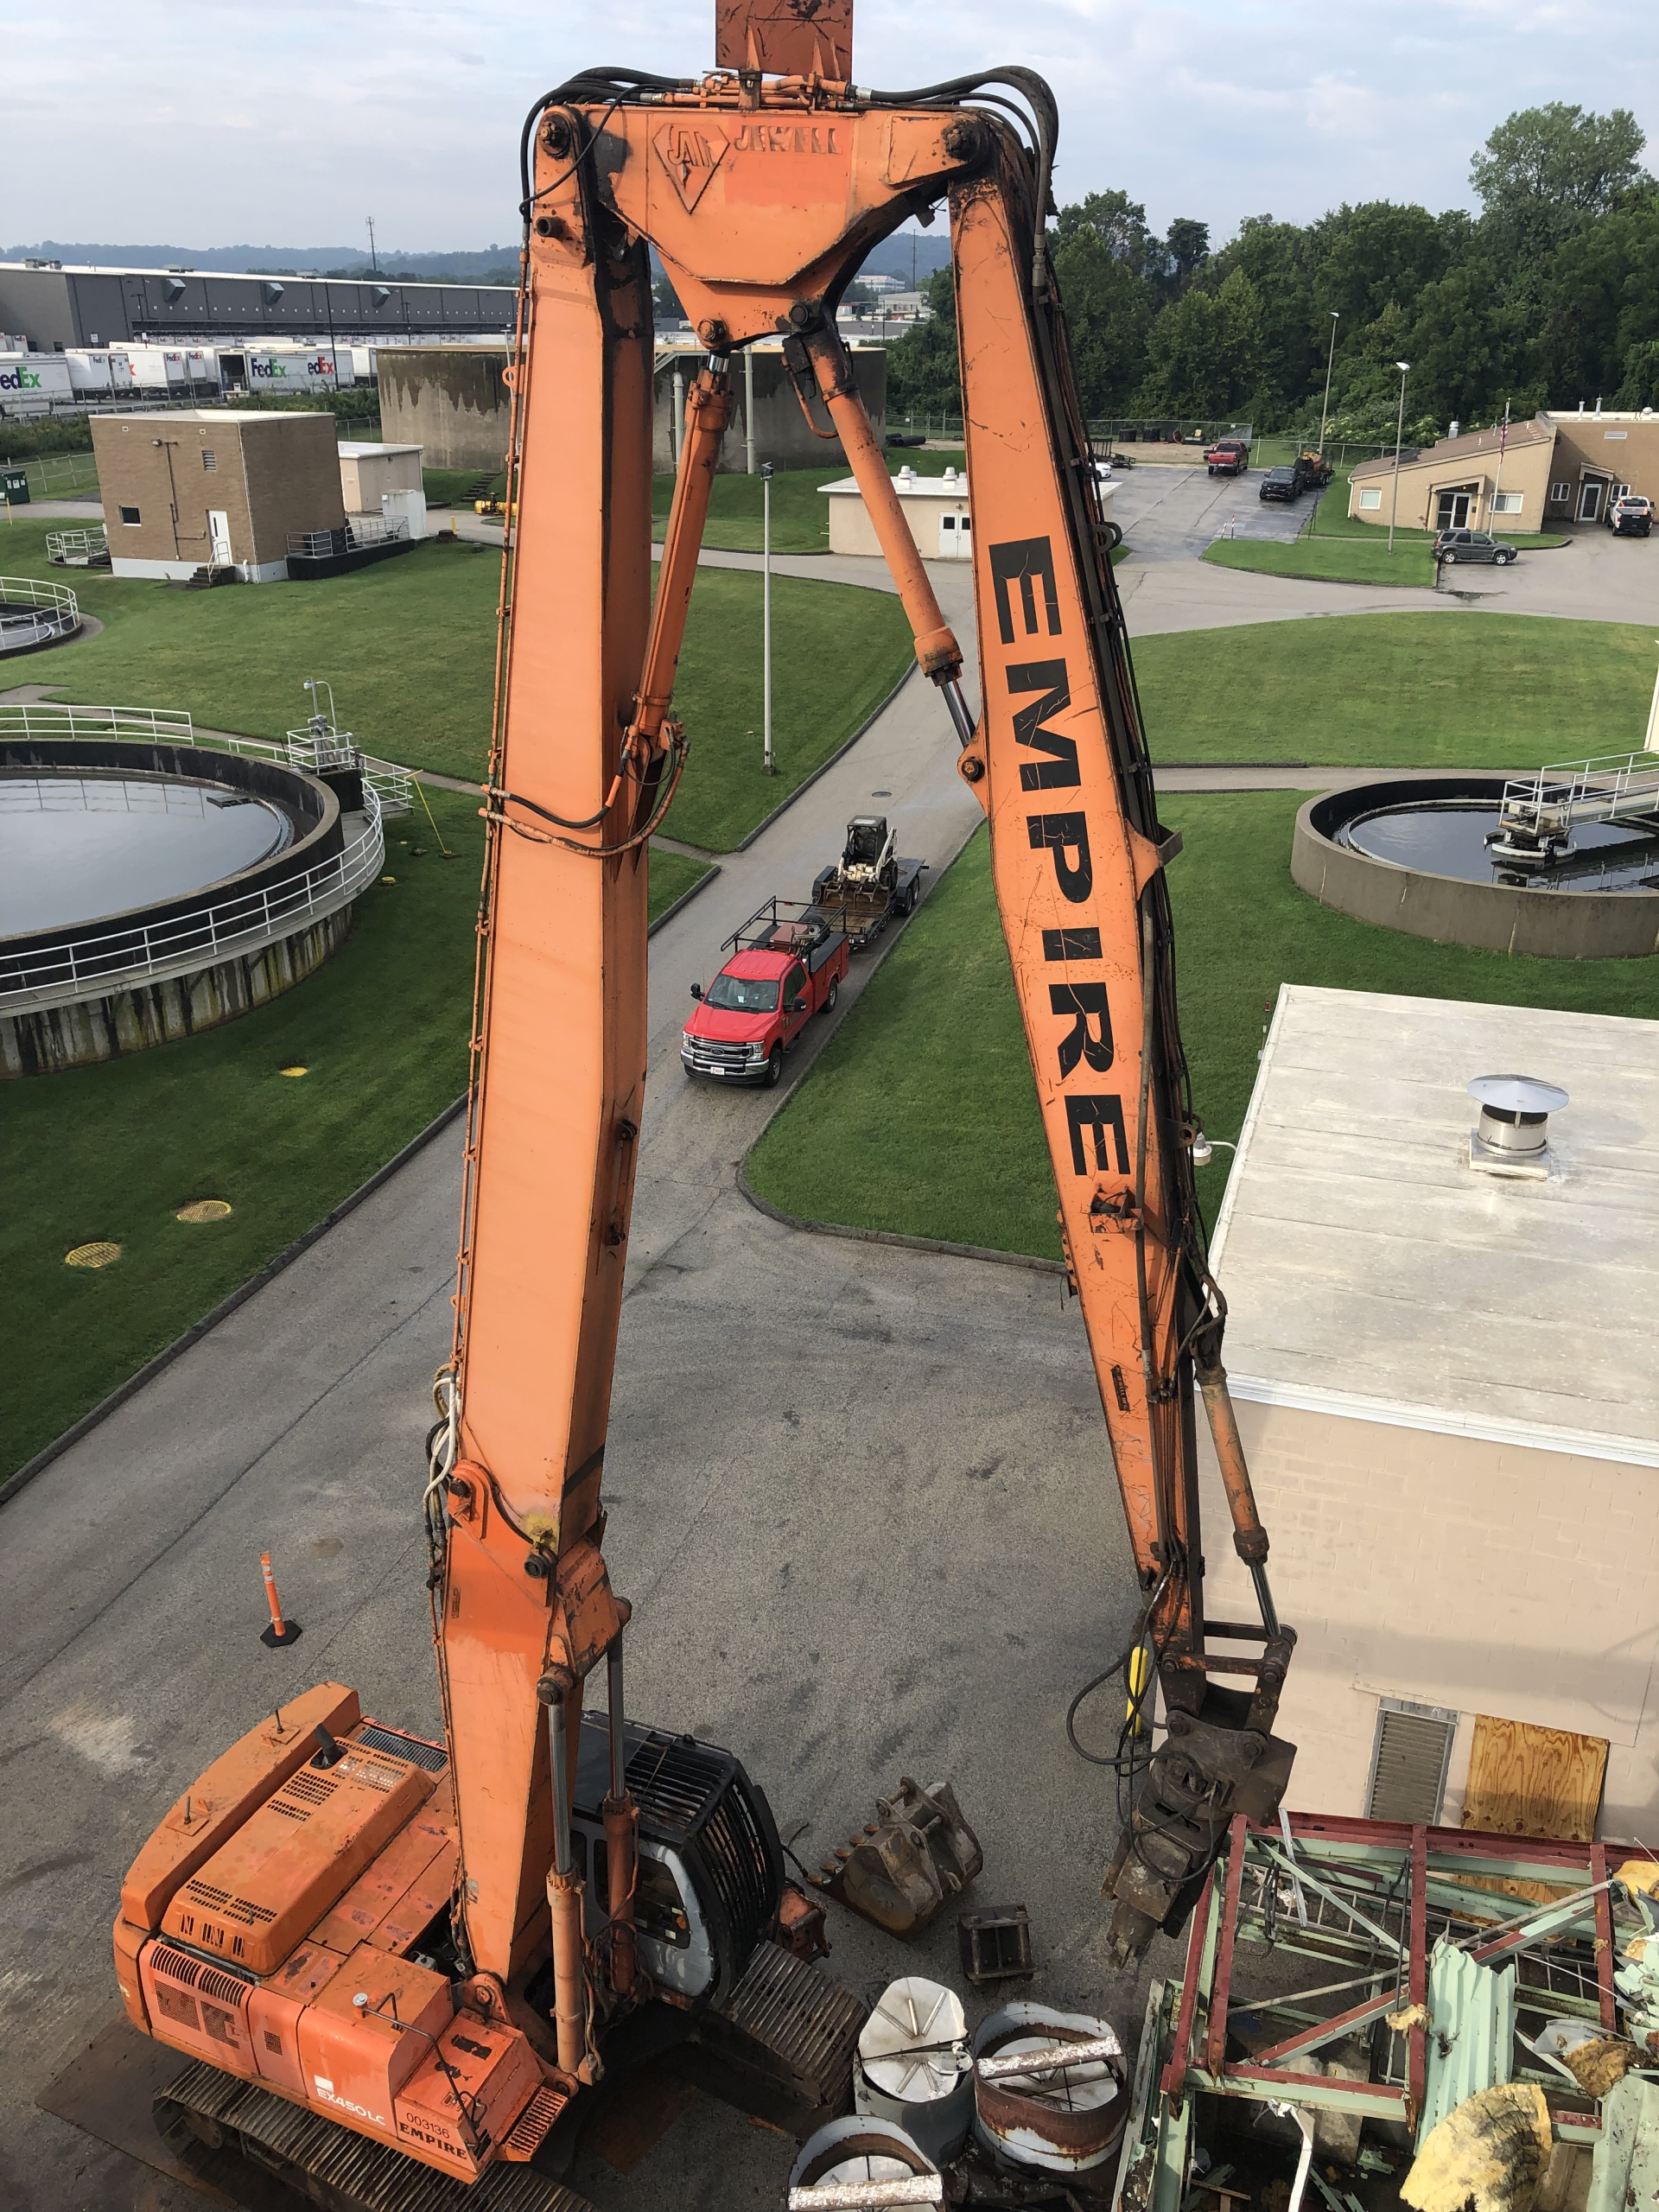 A large orange excavator with the word empire on it